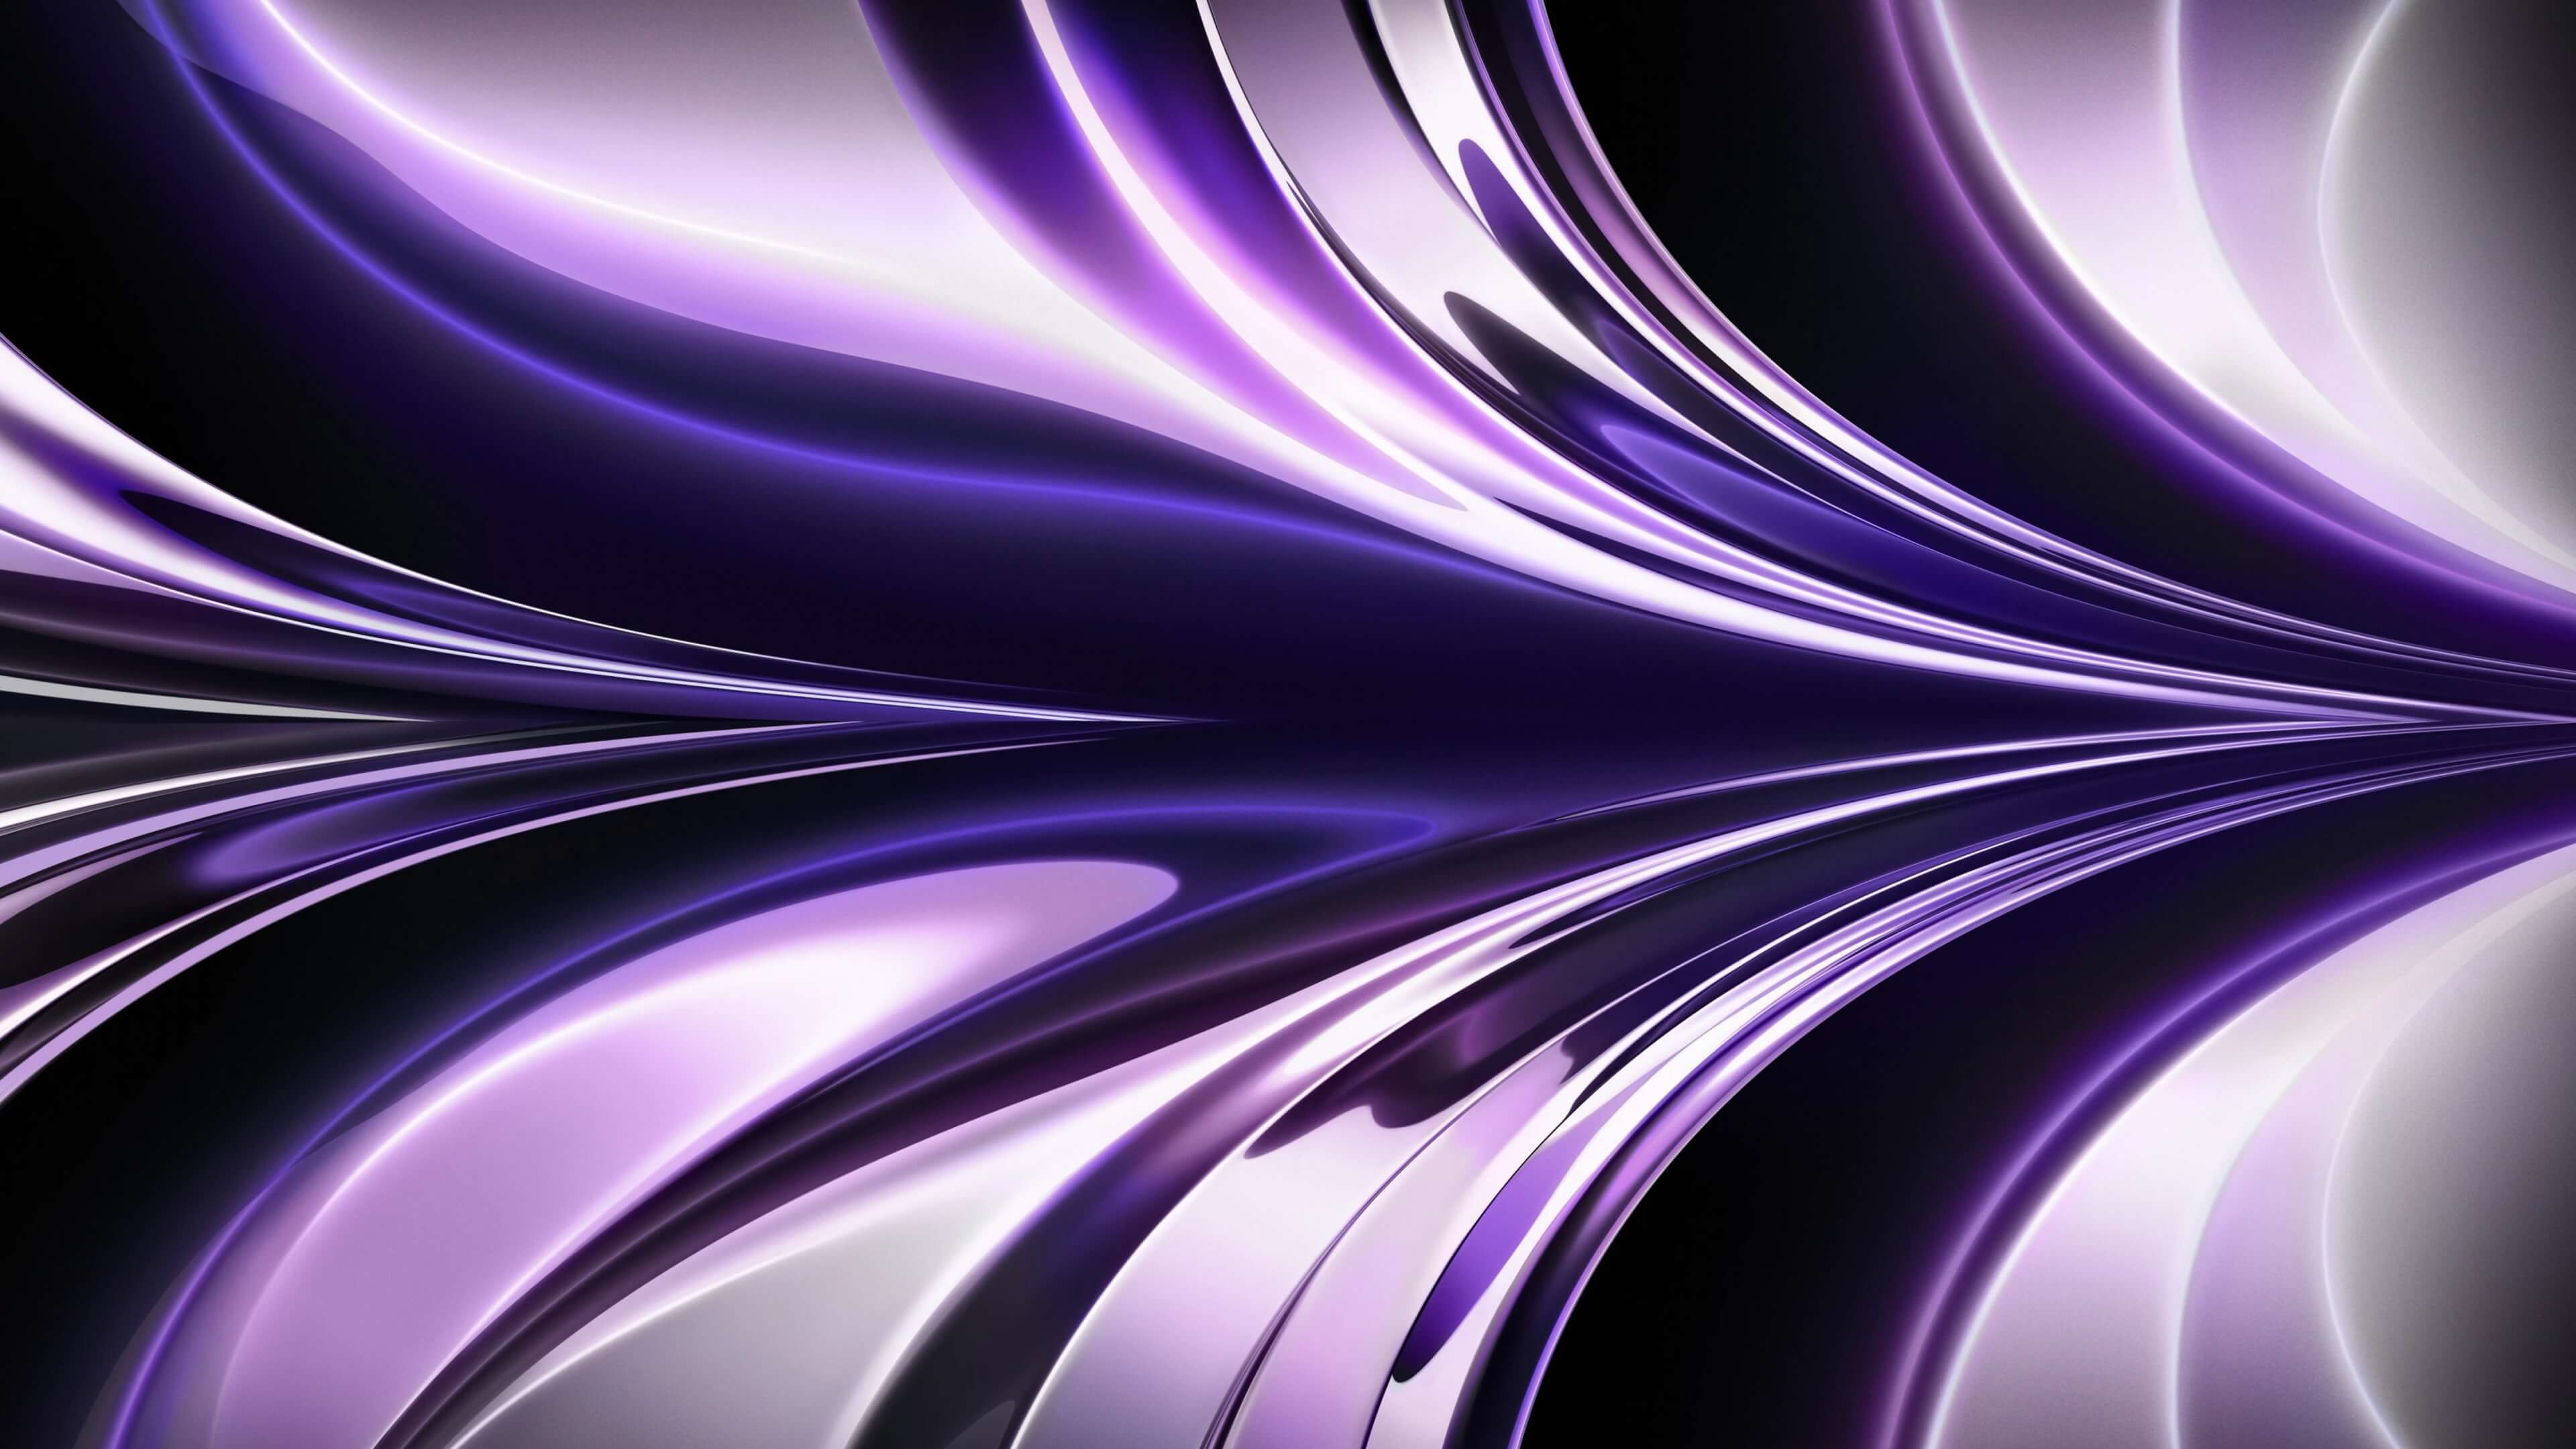 iOS 16 abstract purple style wallpaper 3840x2160